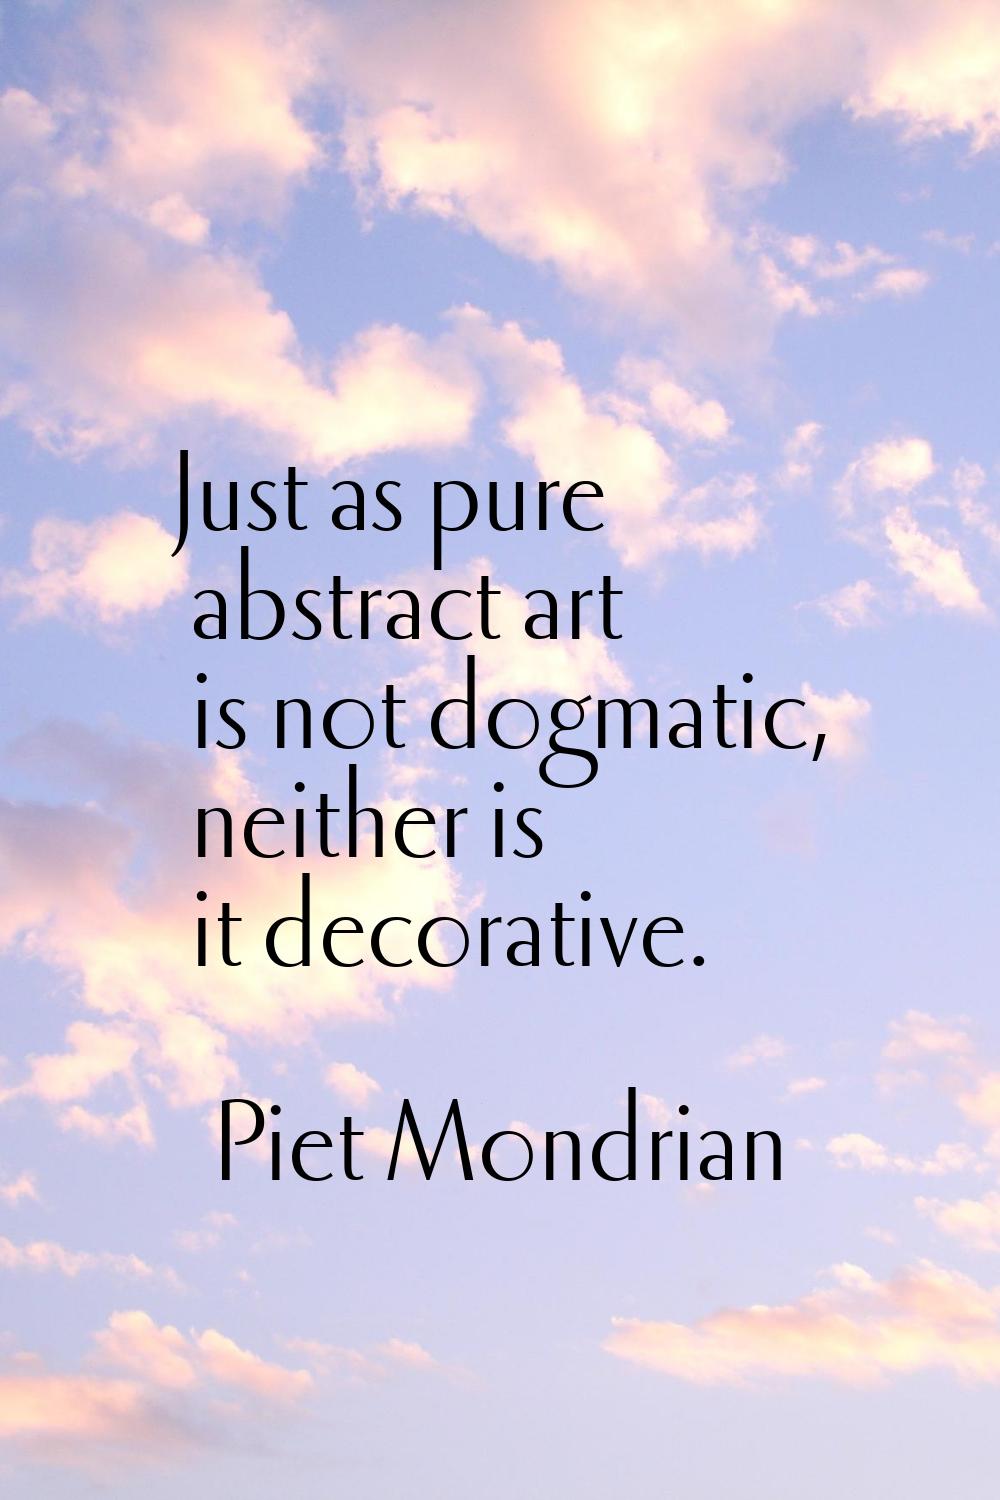 Just as pure abstract art is not dogmatic, neither is it decorative.